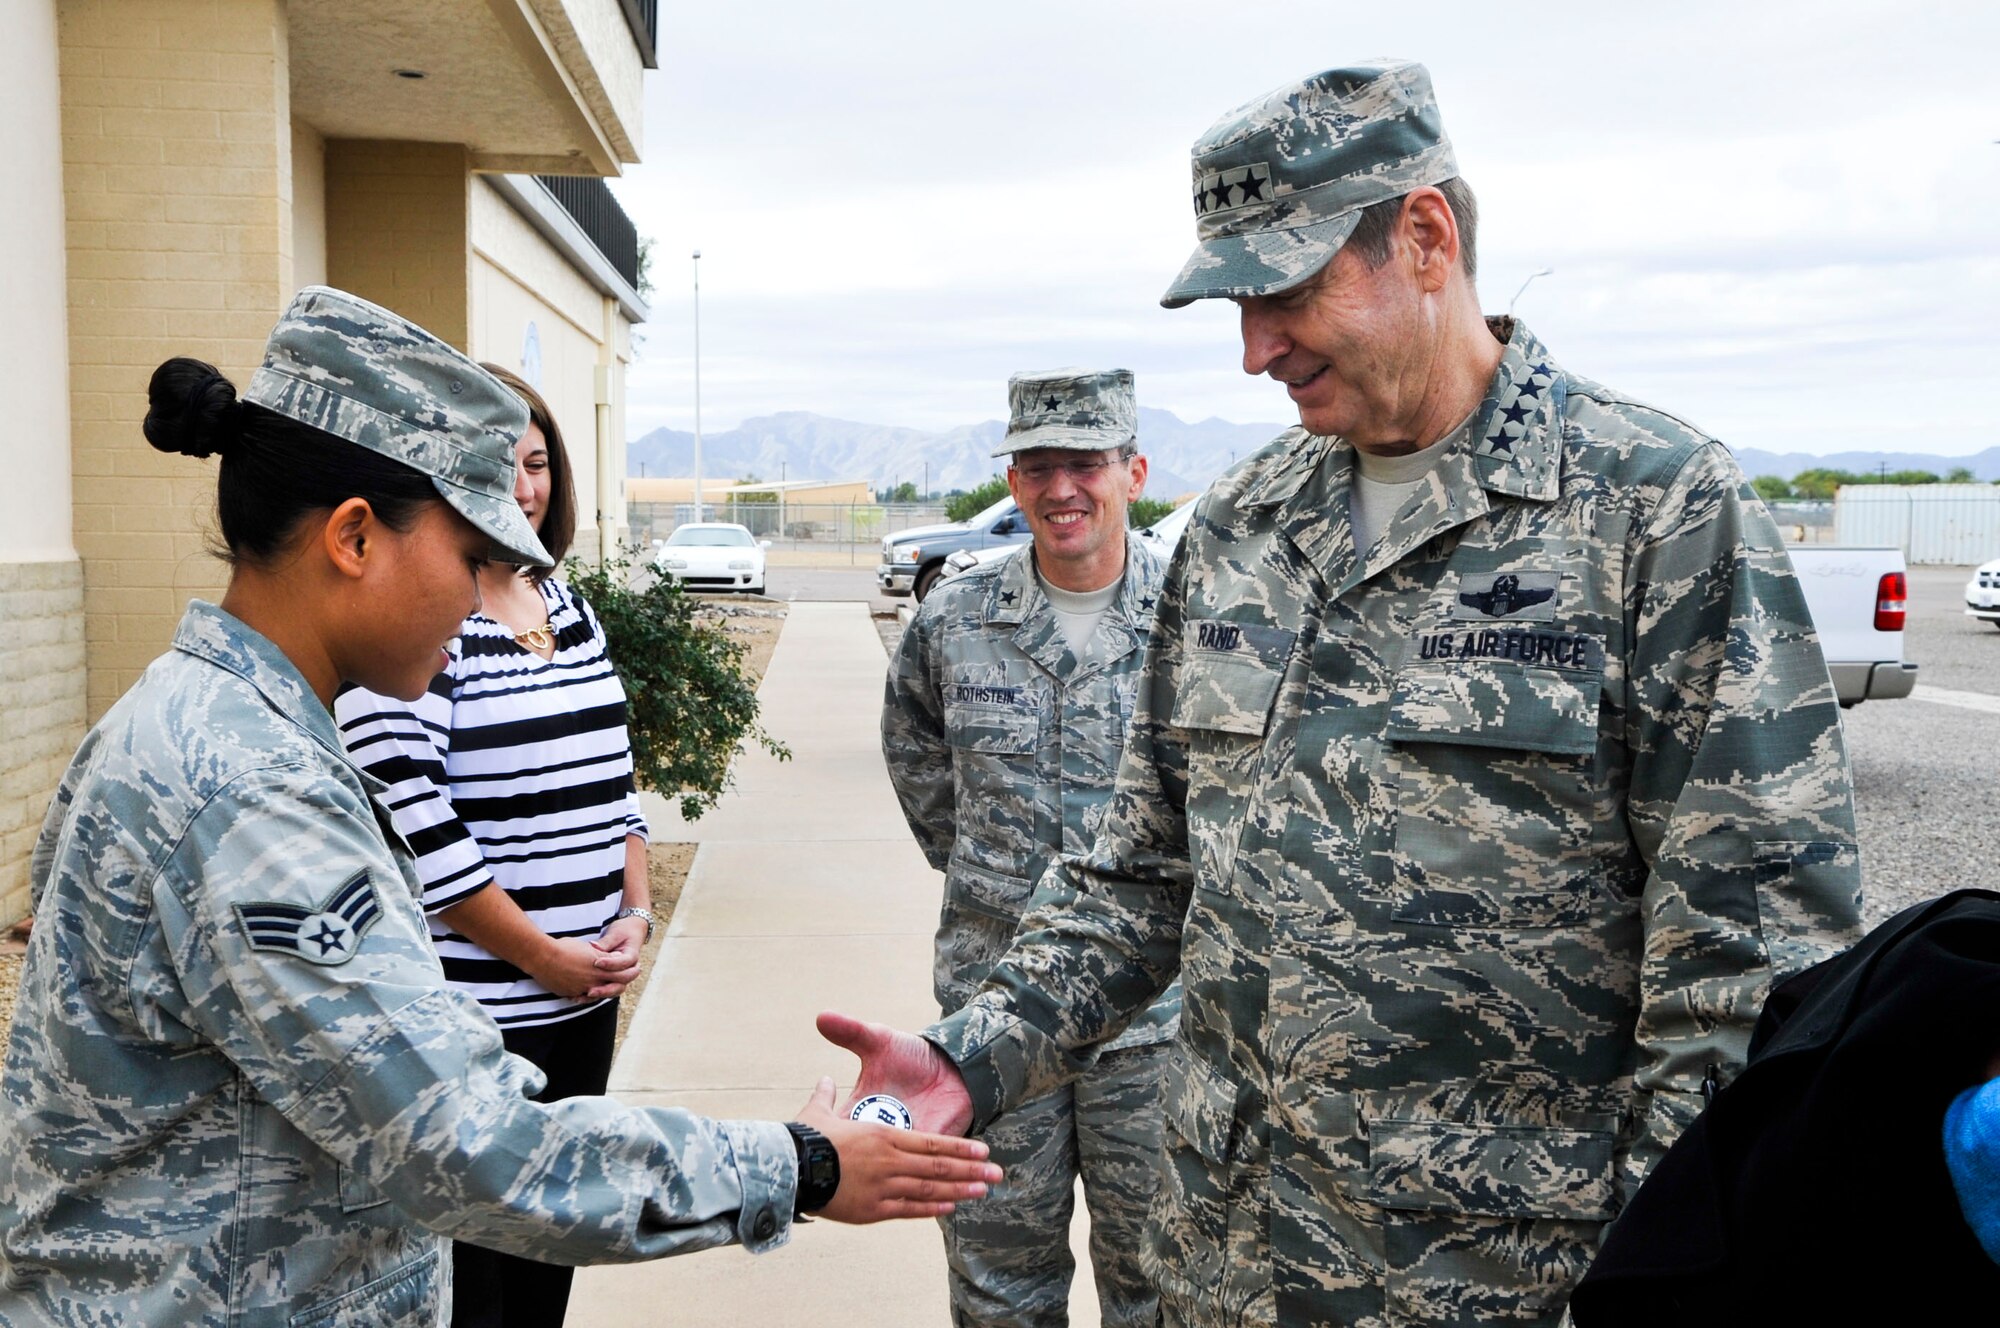 Gen. Robin Rand, Air Education and Training Command commander, presents a coin to Senior Airman Leonila Celestino, 607th Air Control Squadron knowledge operations management journeyman, Dec. 4 outside the 607th ACS building. Rand, a former wing commander at Luke, visited the base to talk to Airmen about his priorities and vision for AETC. (U.S. Air Force photo/Senior Airman David Owsianka)